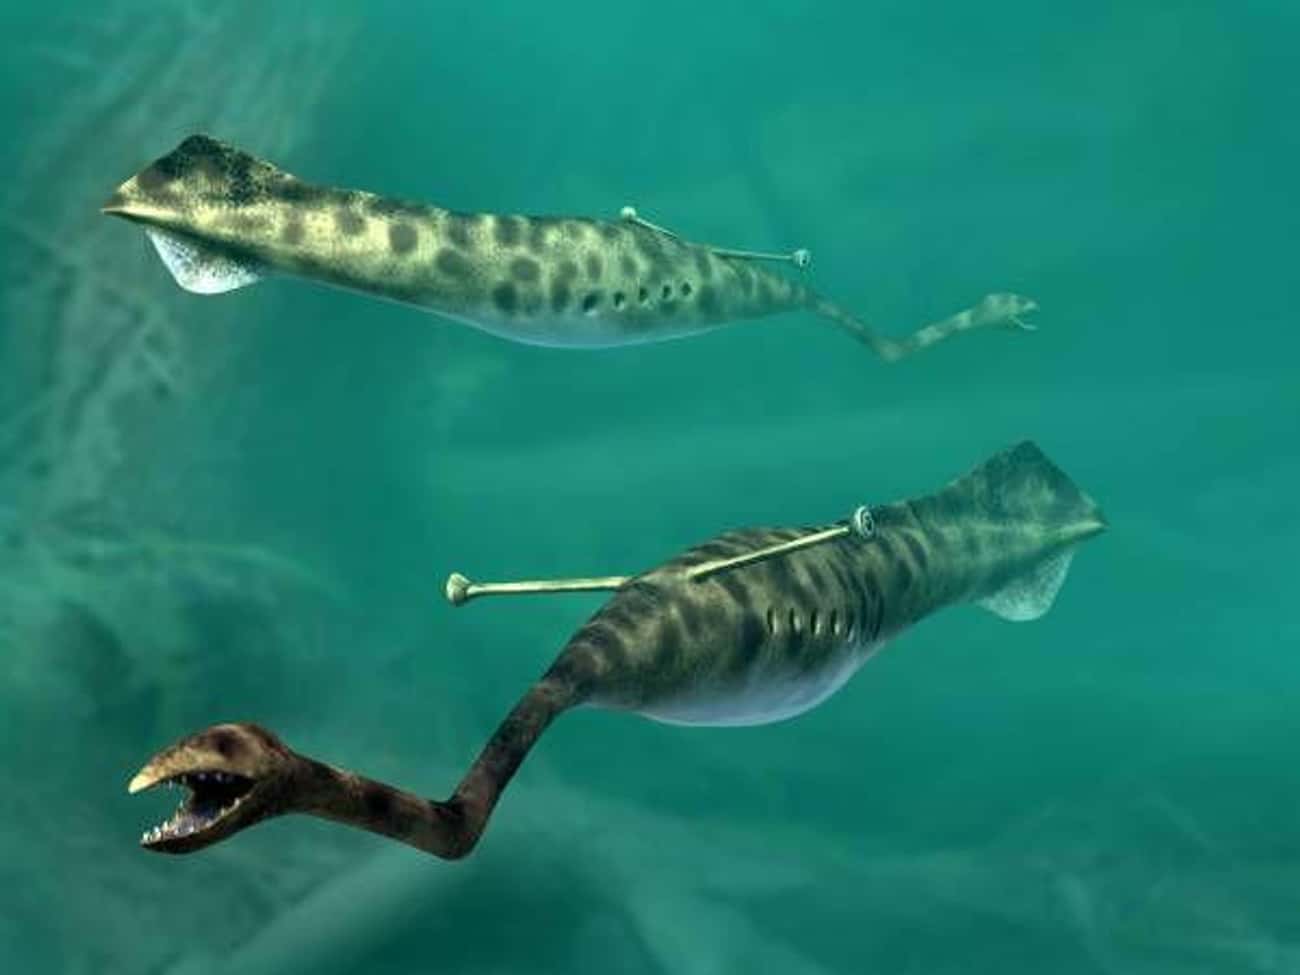 The Tully Monster Was An Ancient Lamprey